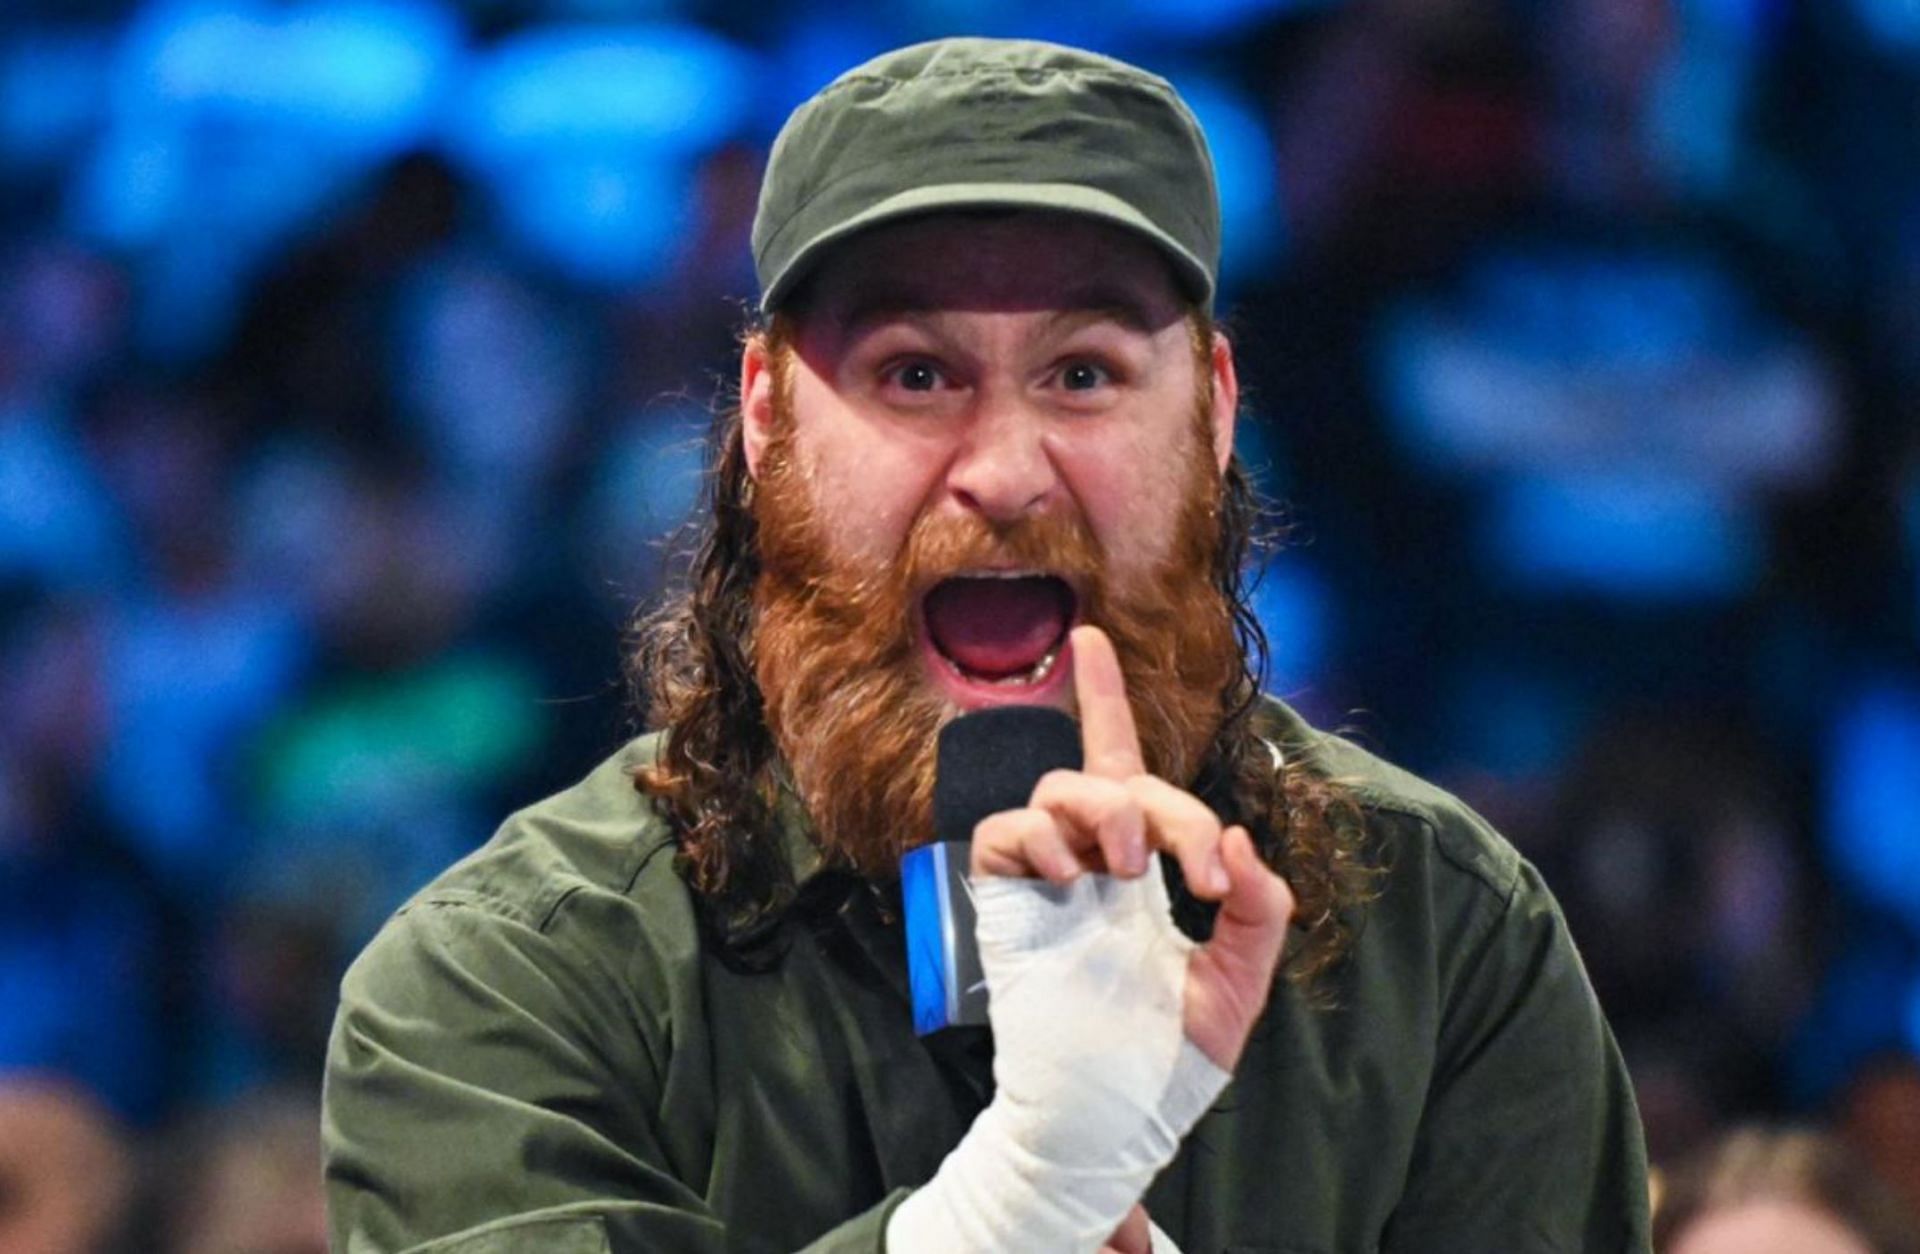 Sami Zayn took a count-out loss on SmackDown this week.